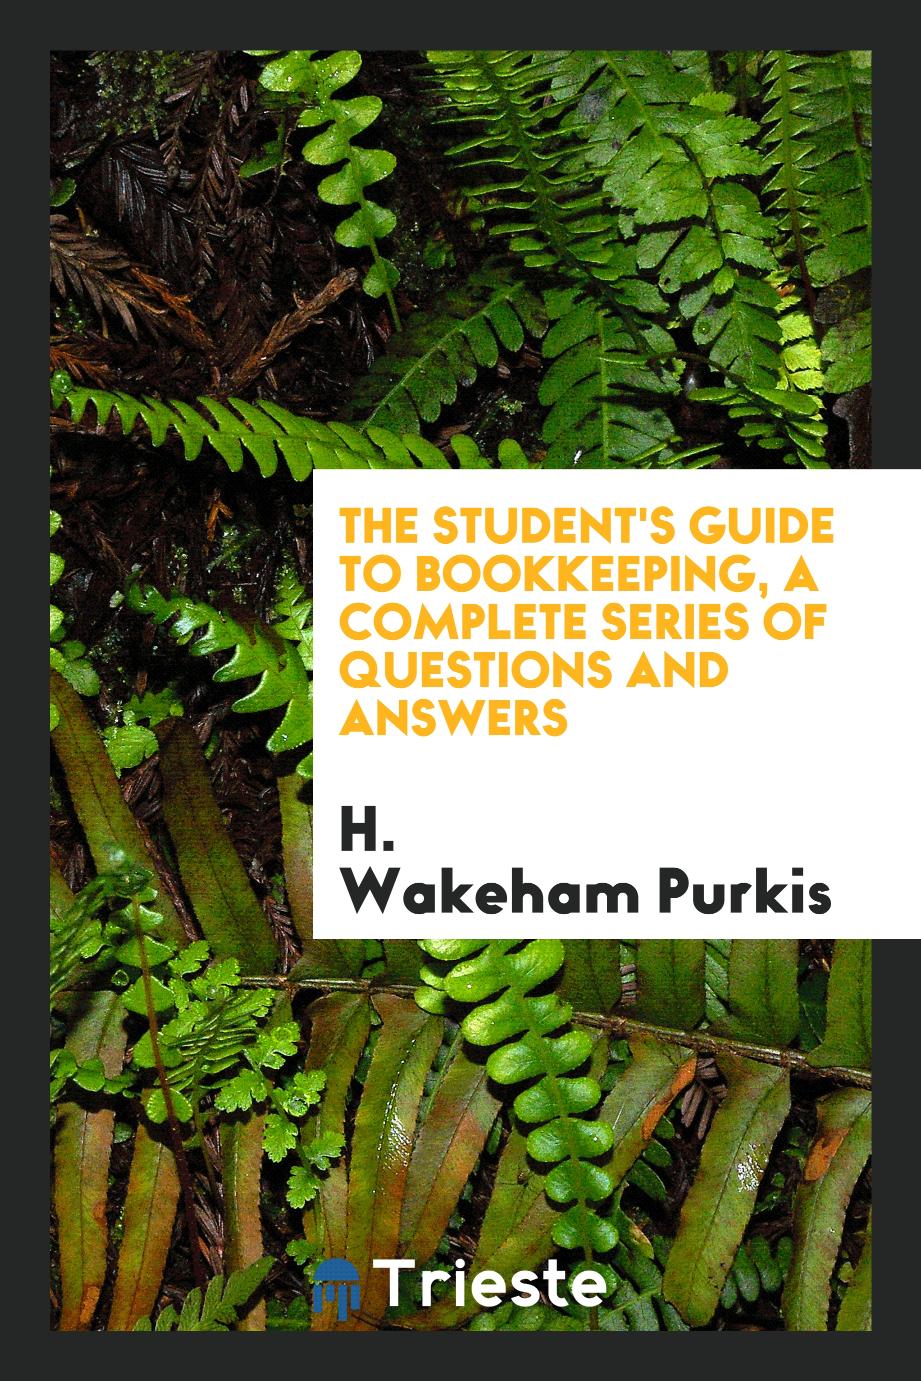 The student's guide to bookkeeping, a complete series of questions and answers